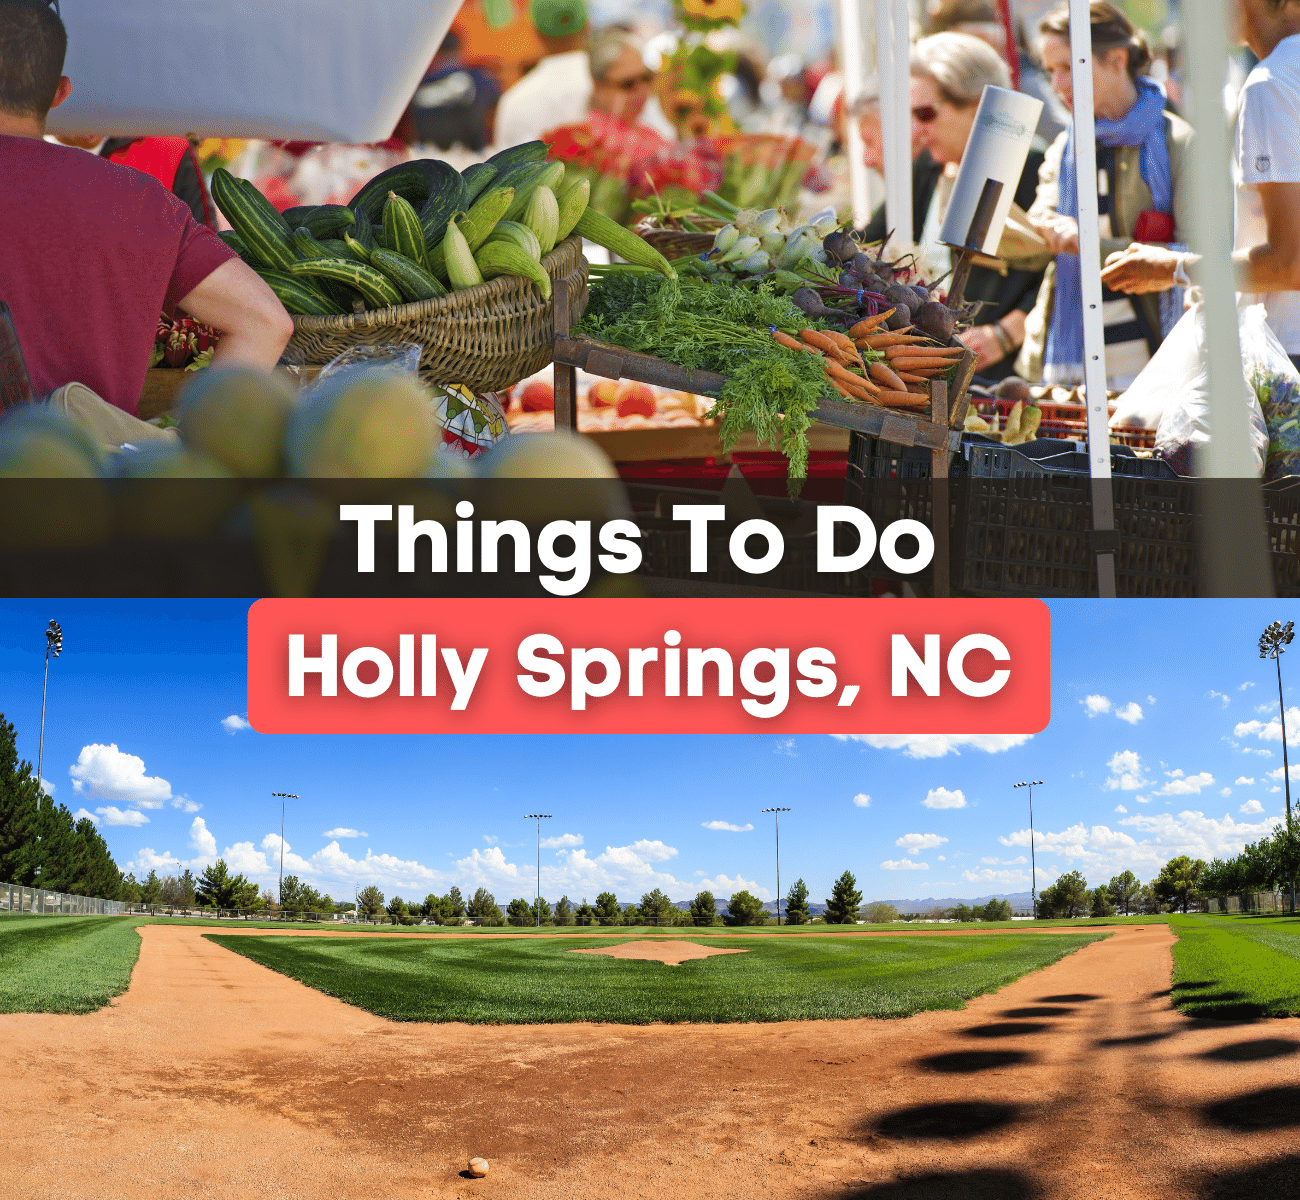 farmers market and baseball field things to do in Holly Springs, NC